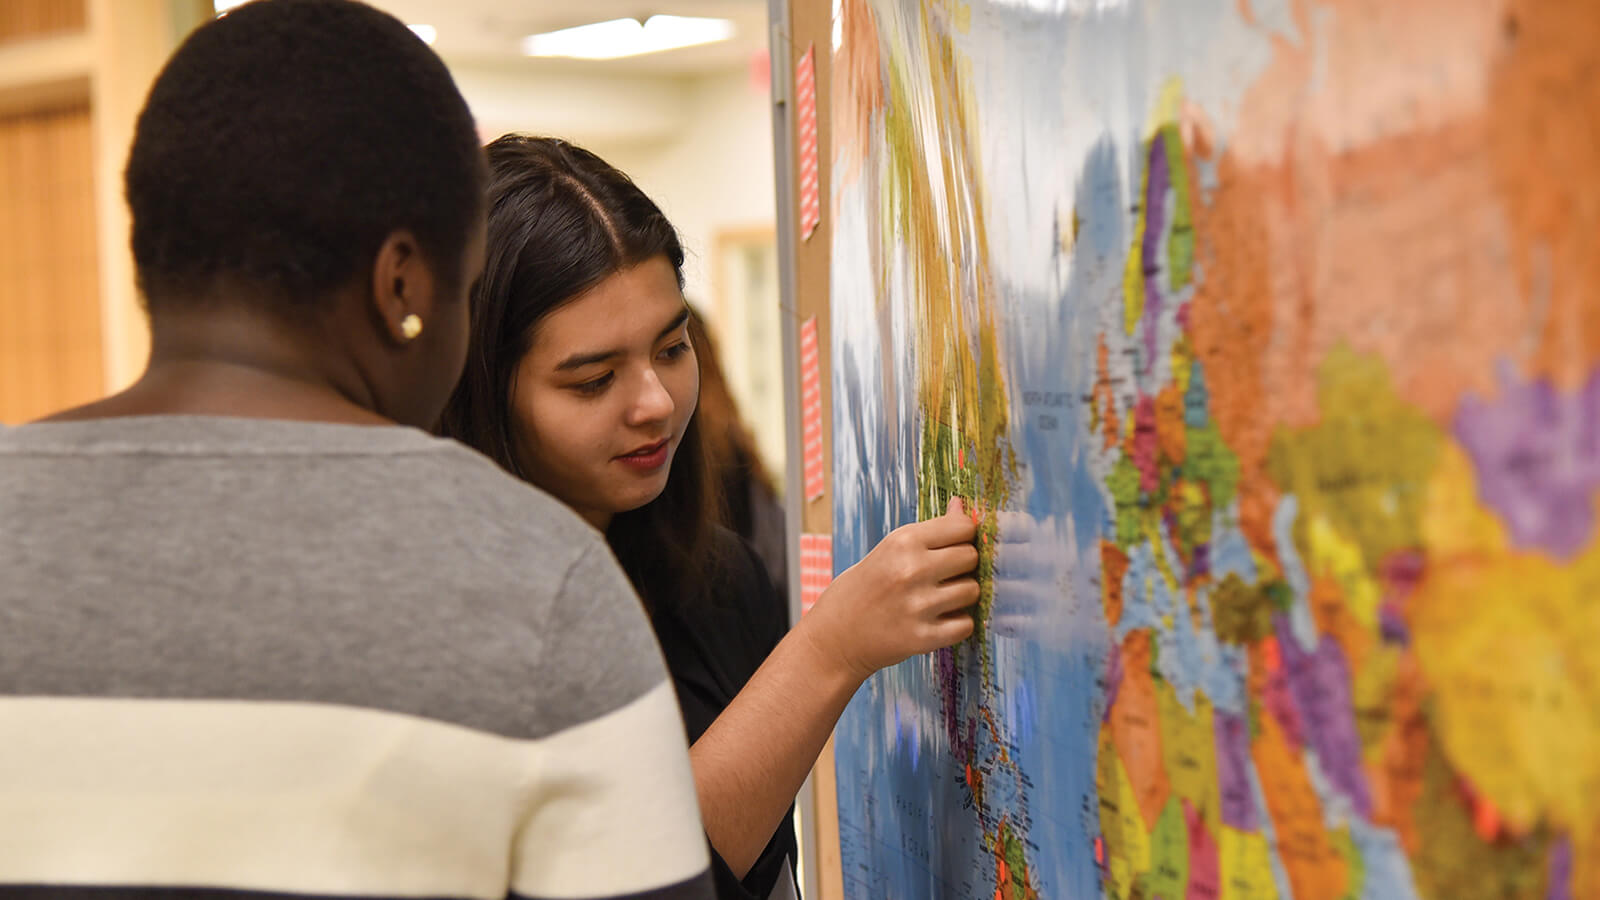 Students place marker on world map poster.